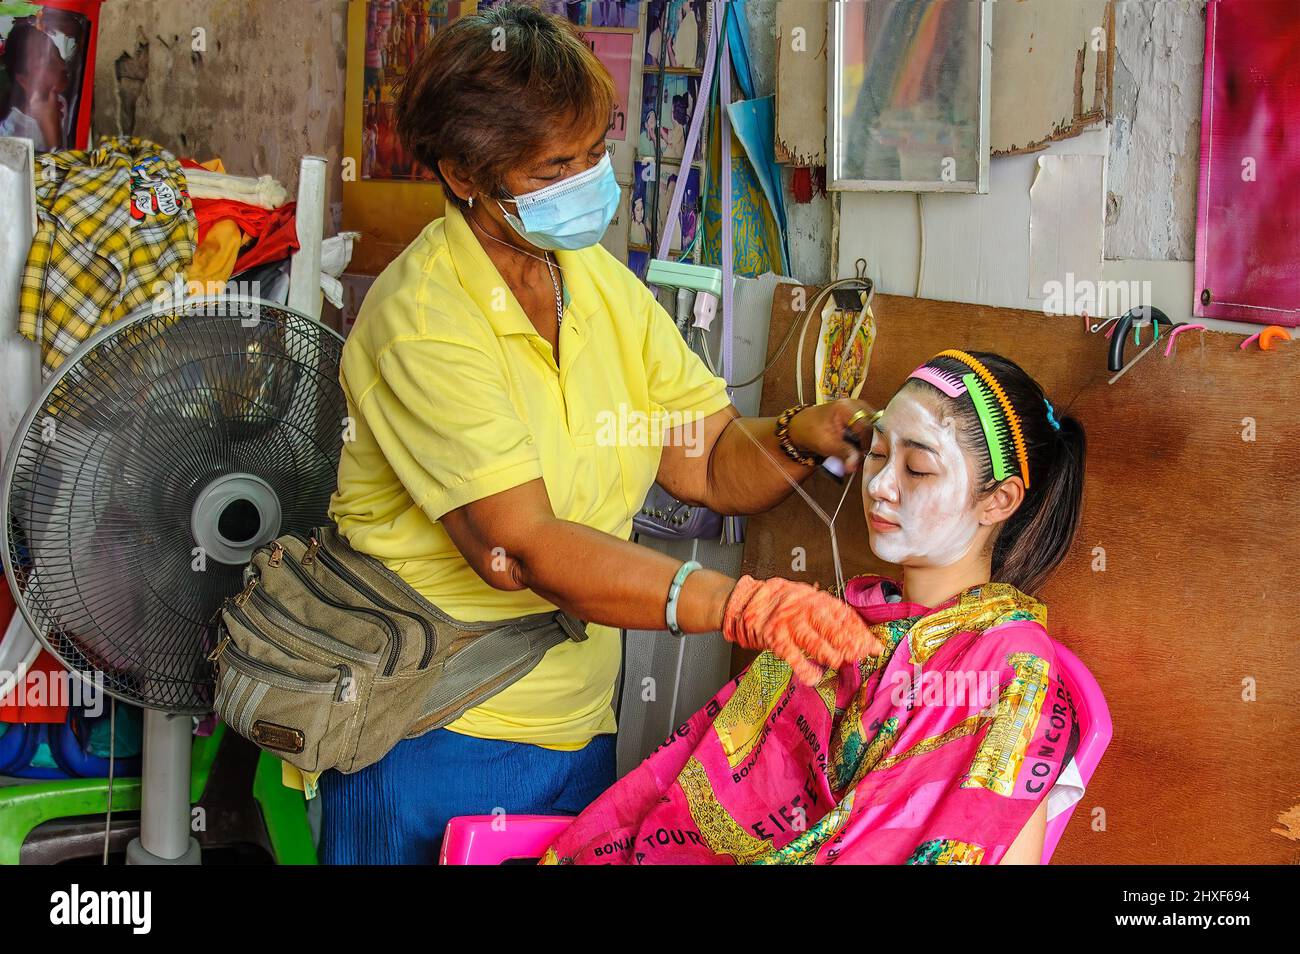 Chinatown, Bangkok – Nov, 14, 2020: Ancient Chinese method of removing facial hair using two threads to squeeze and pull. Stock Photo